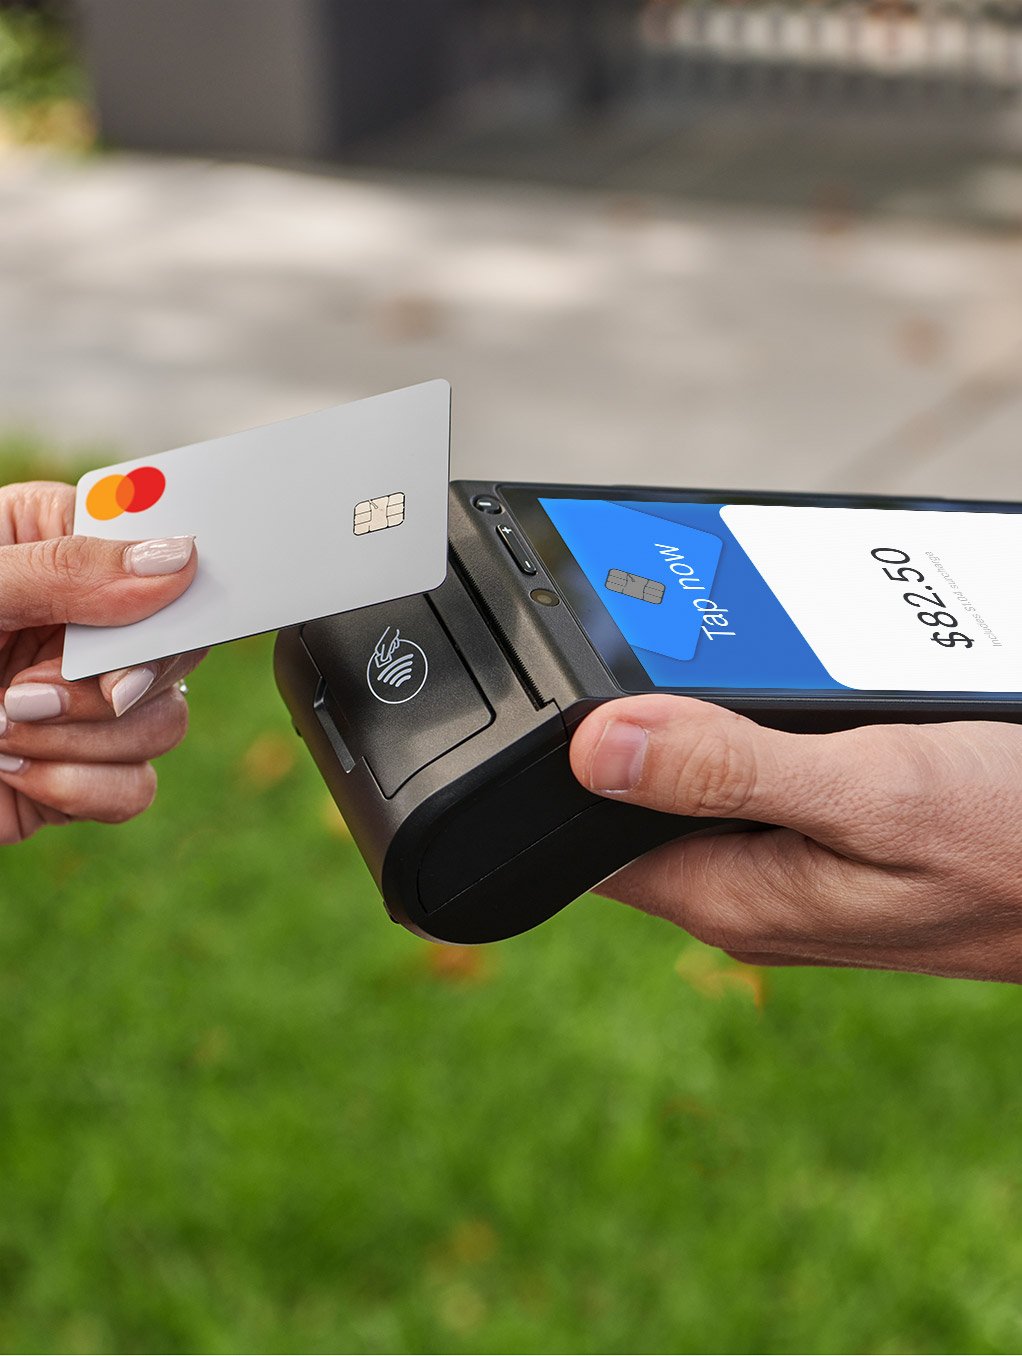 Customer making a contactless payment on Zeller’s mobile credit card reader in a park